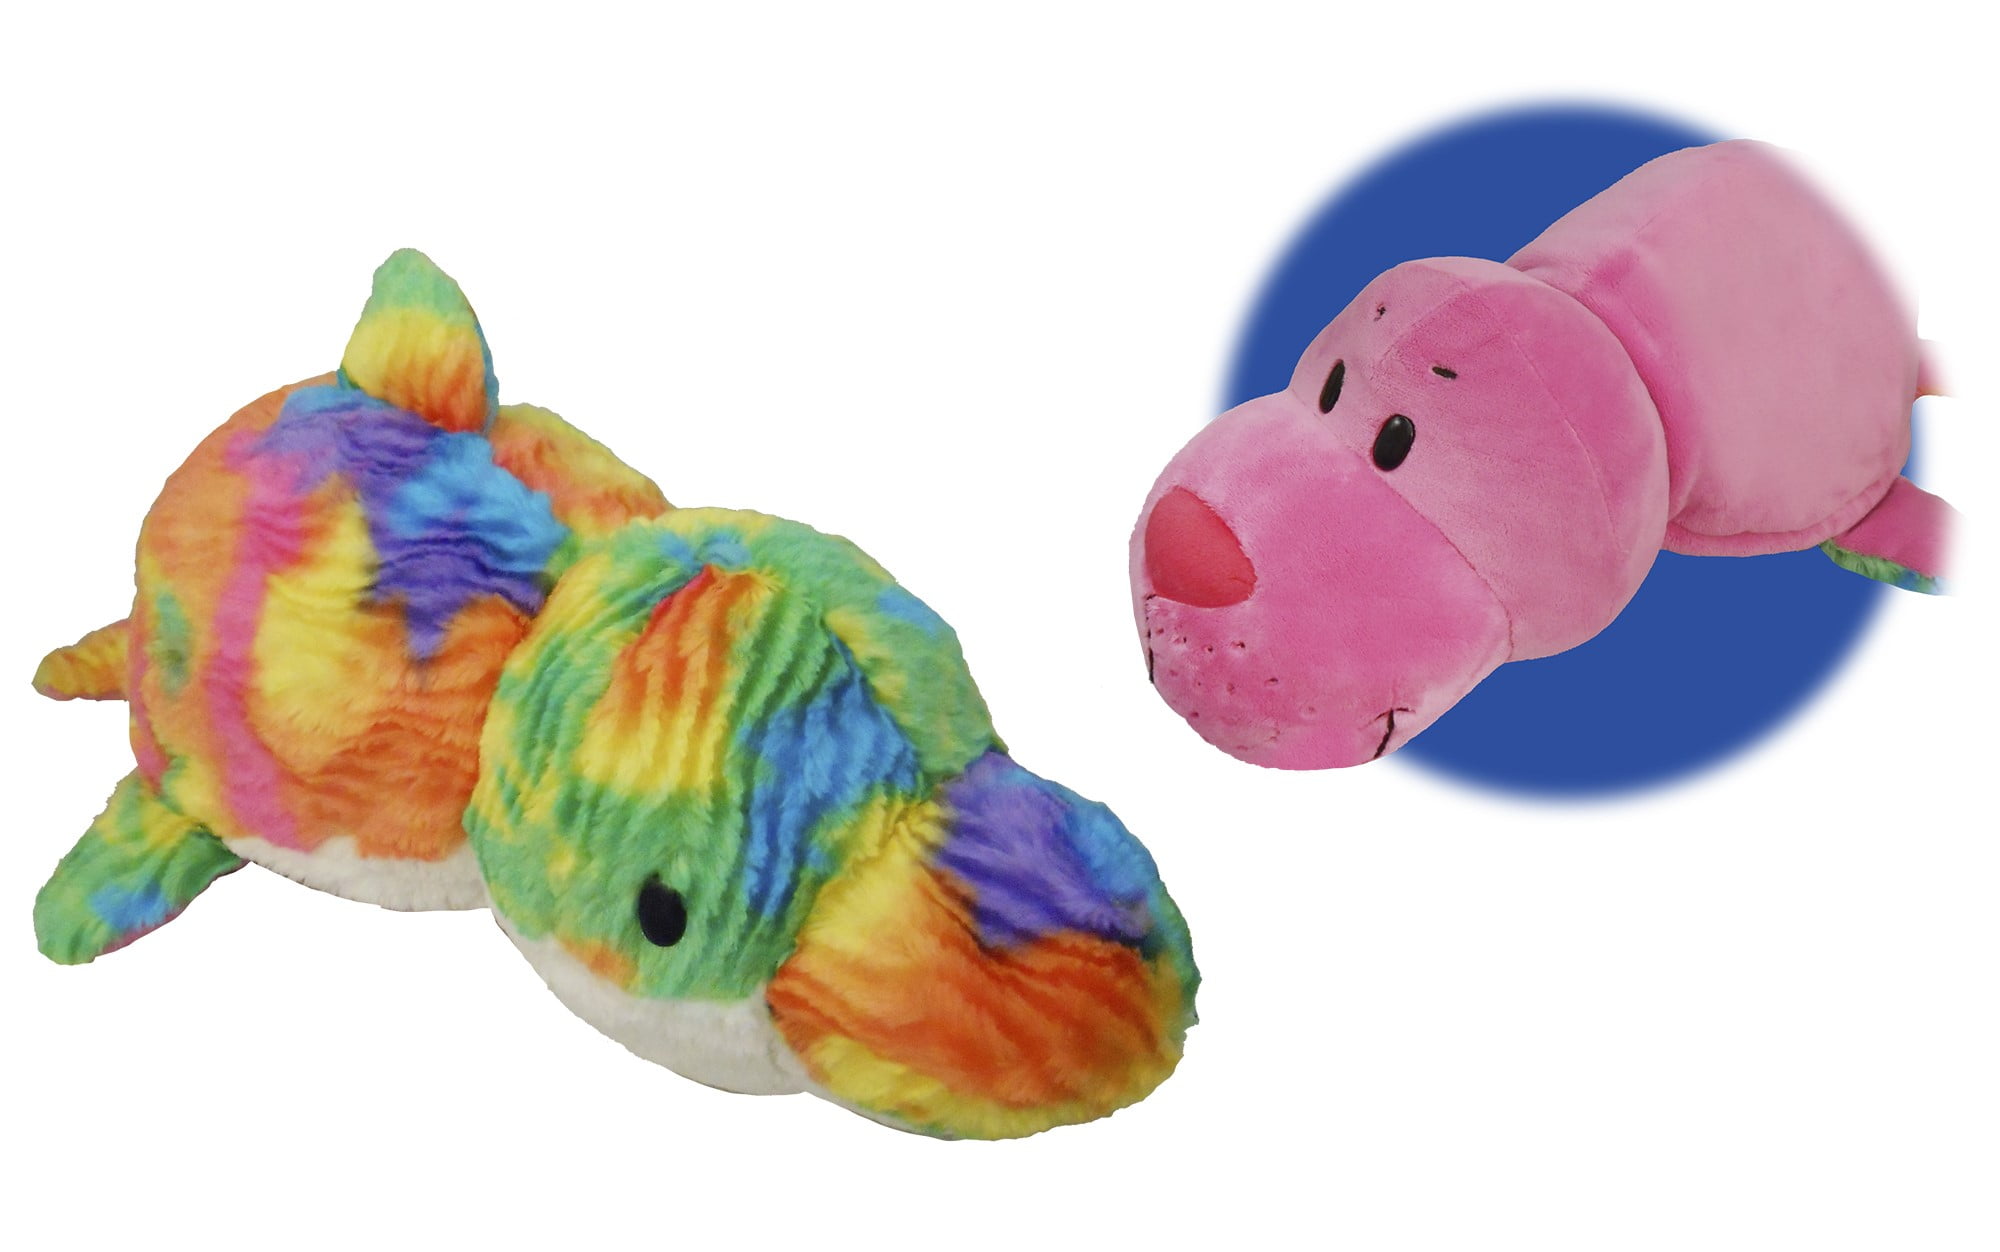 FlipaZoo 20" Grizzly Bear Alligator 2 in 1 Plush Flip a Zoo Pillow for sale online 